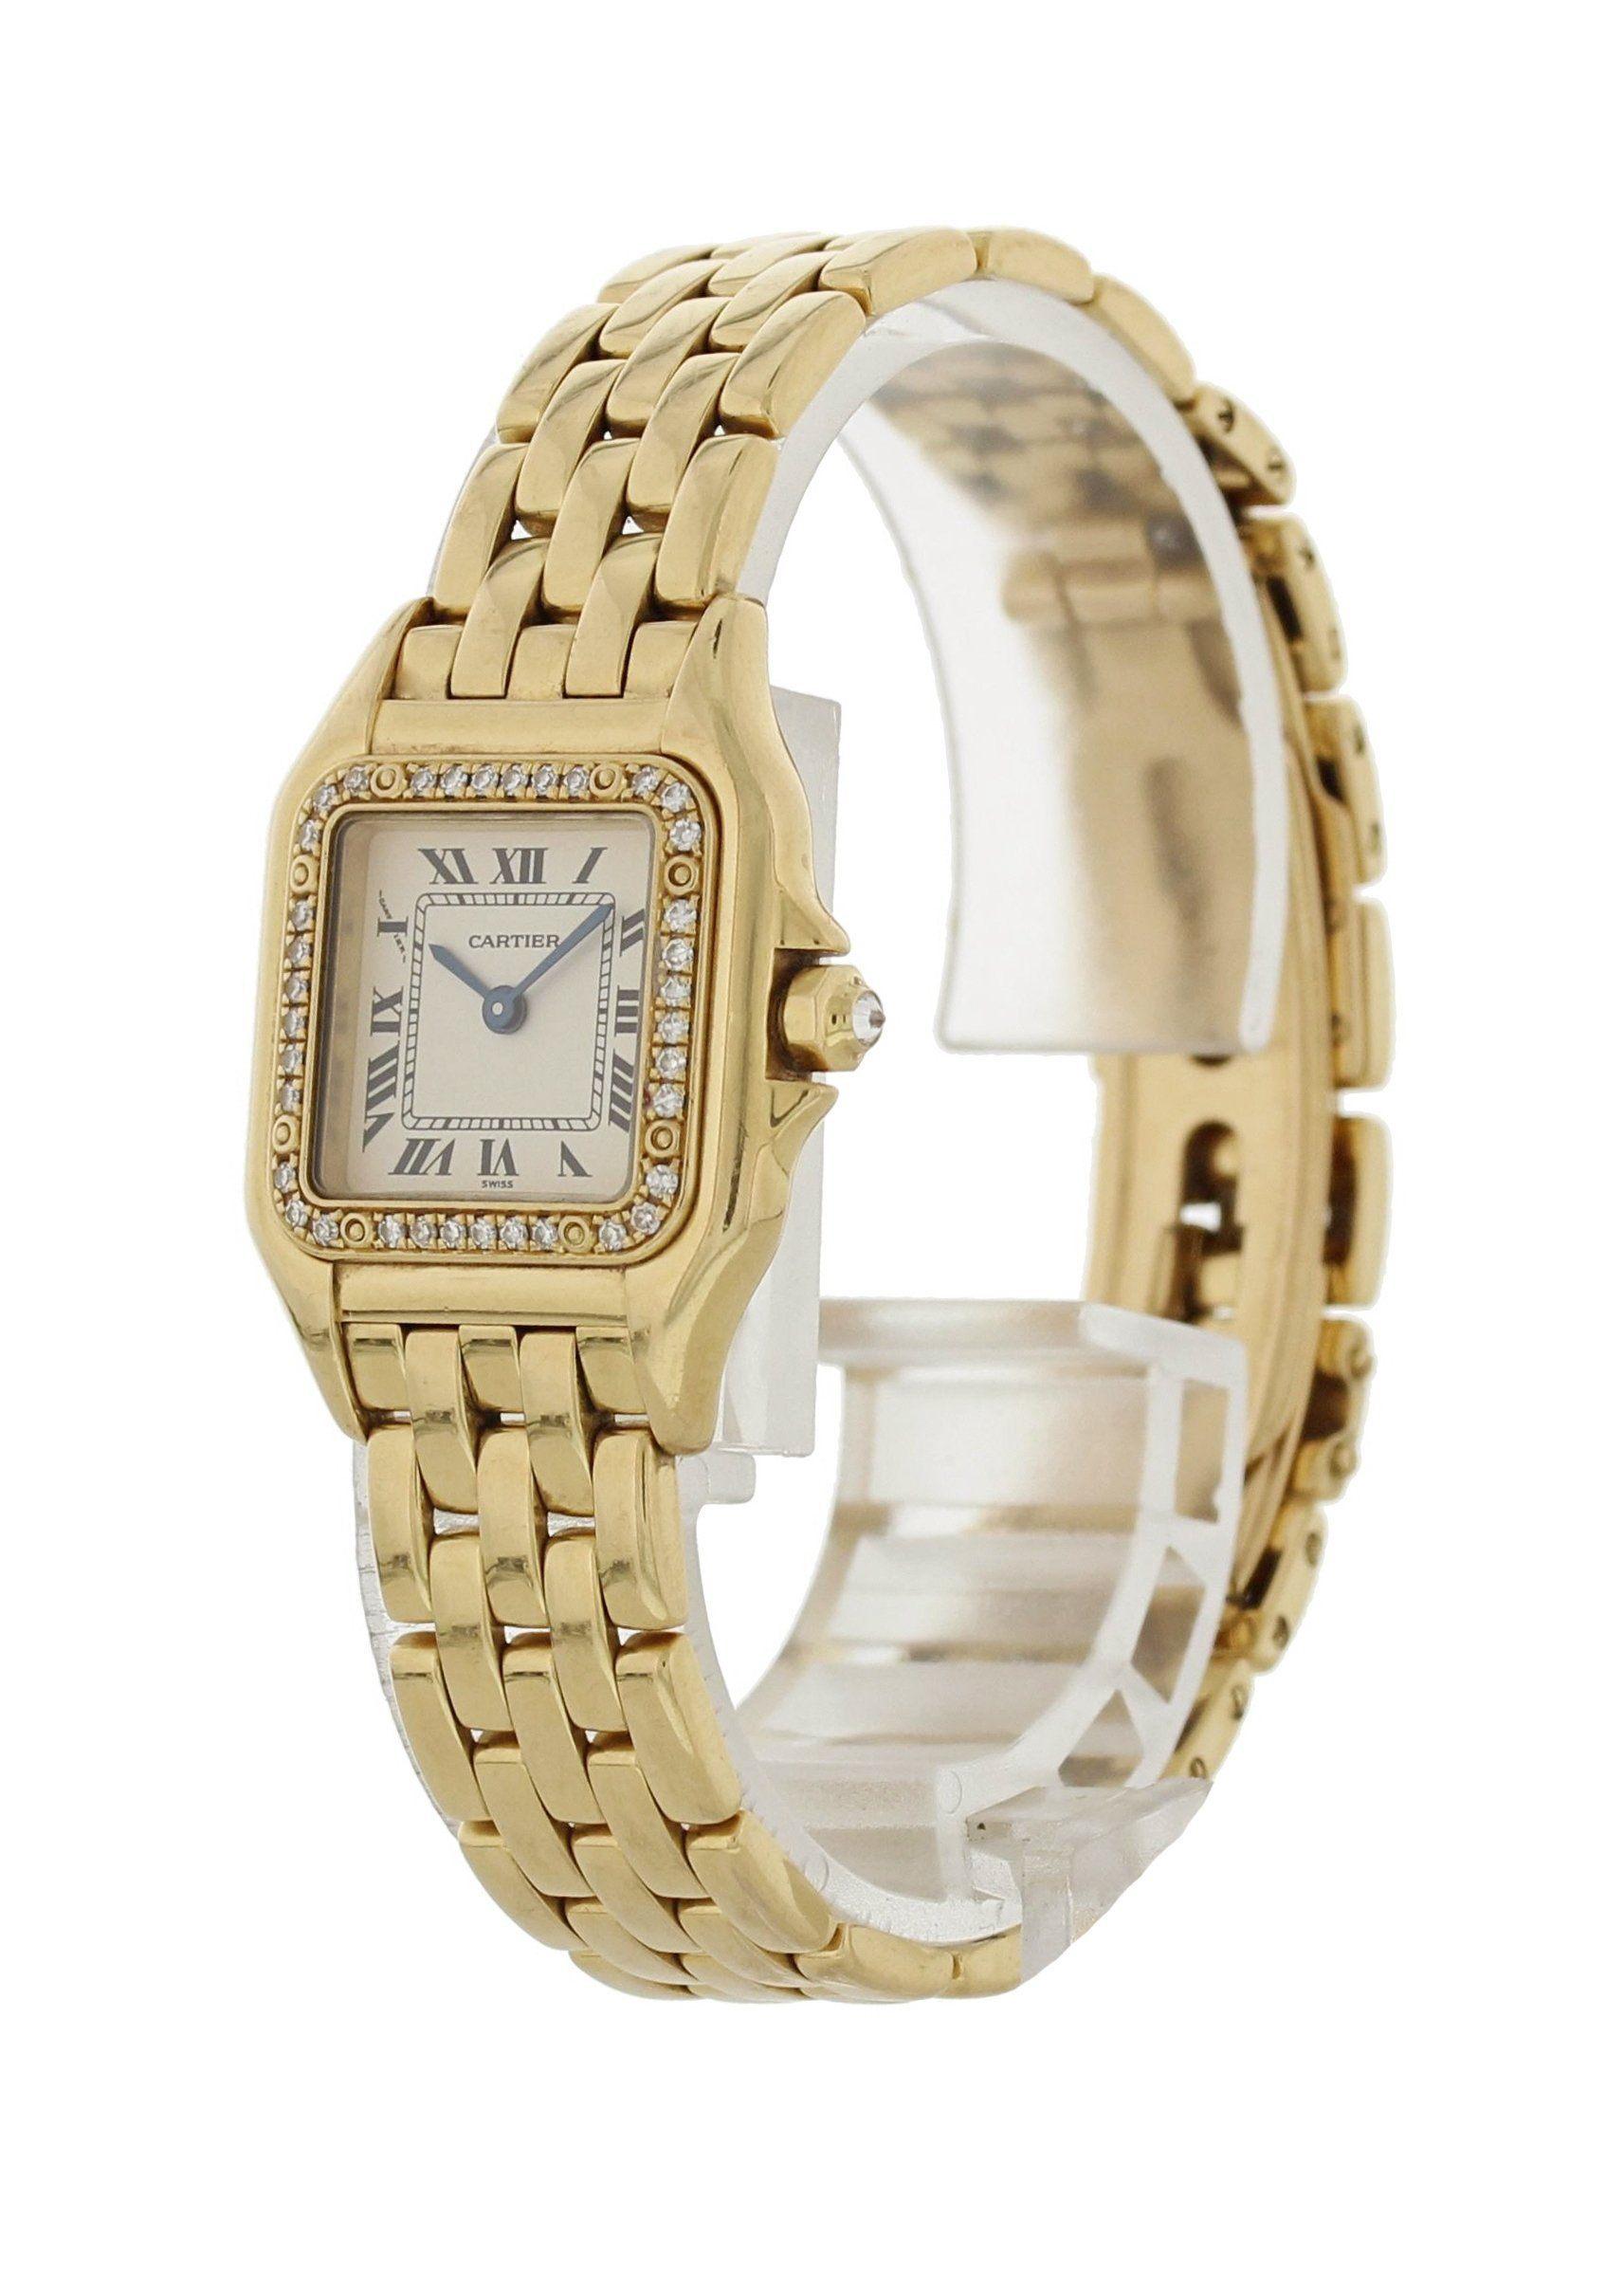 Cartier Panthere 1280 18 Karat Ladies Diamonds Watch In Excellent Condition For Sale In New York, NY